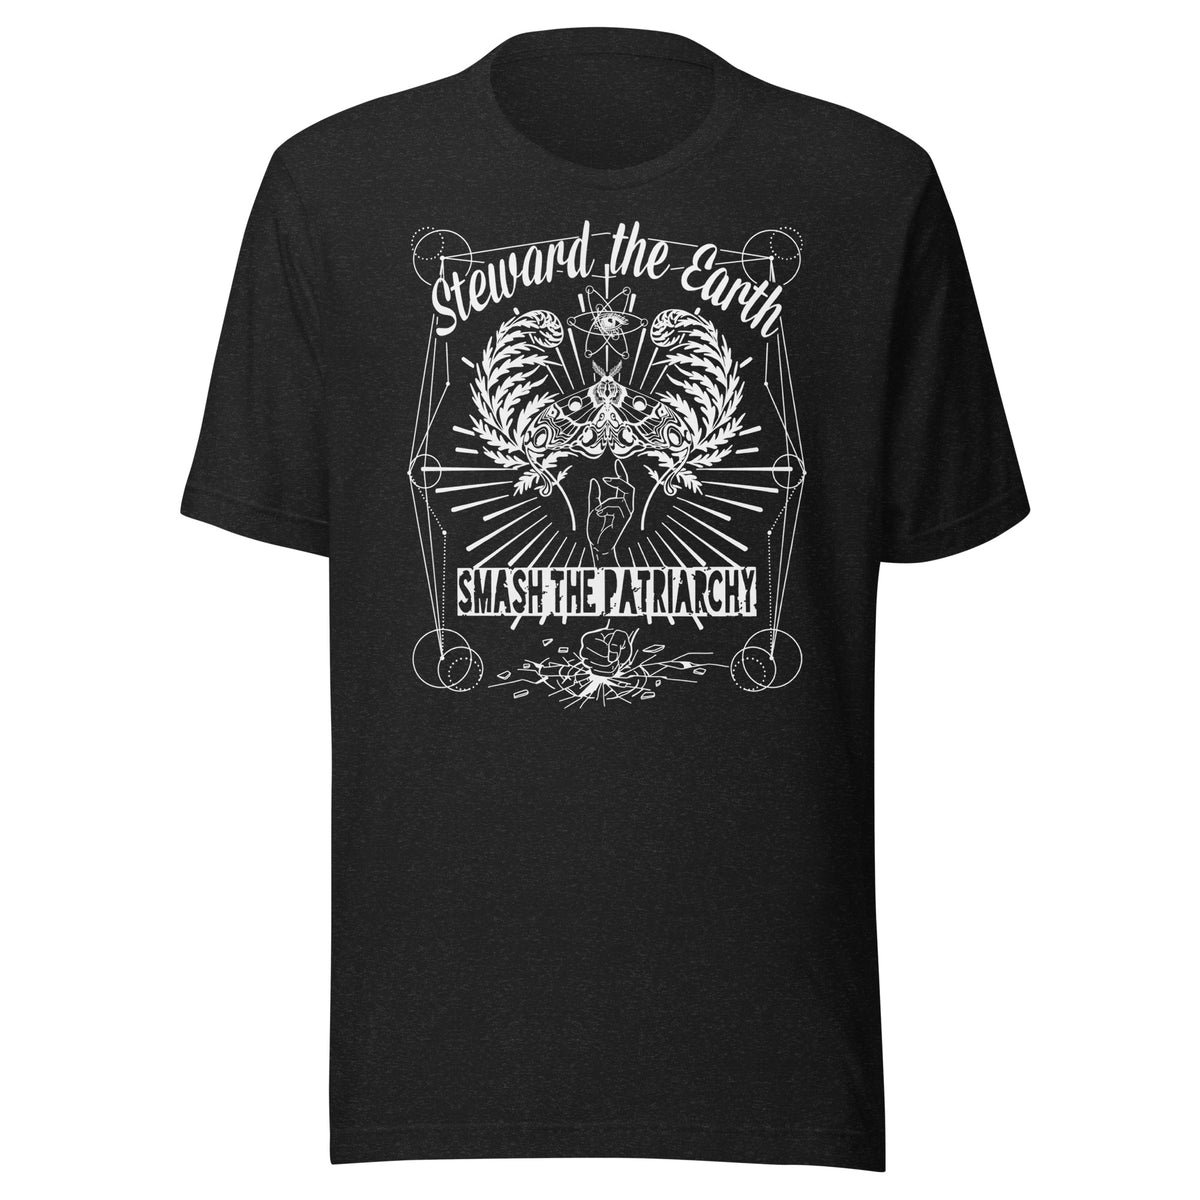 Steward The Earth - Smash The Patriarchy (Adult Unisex)